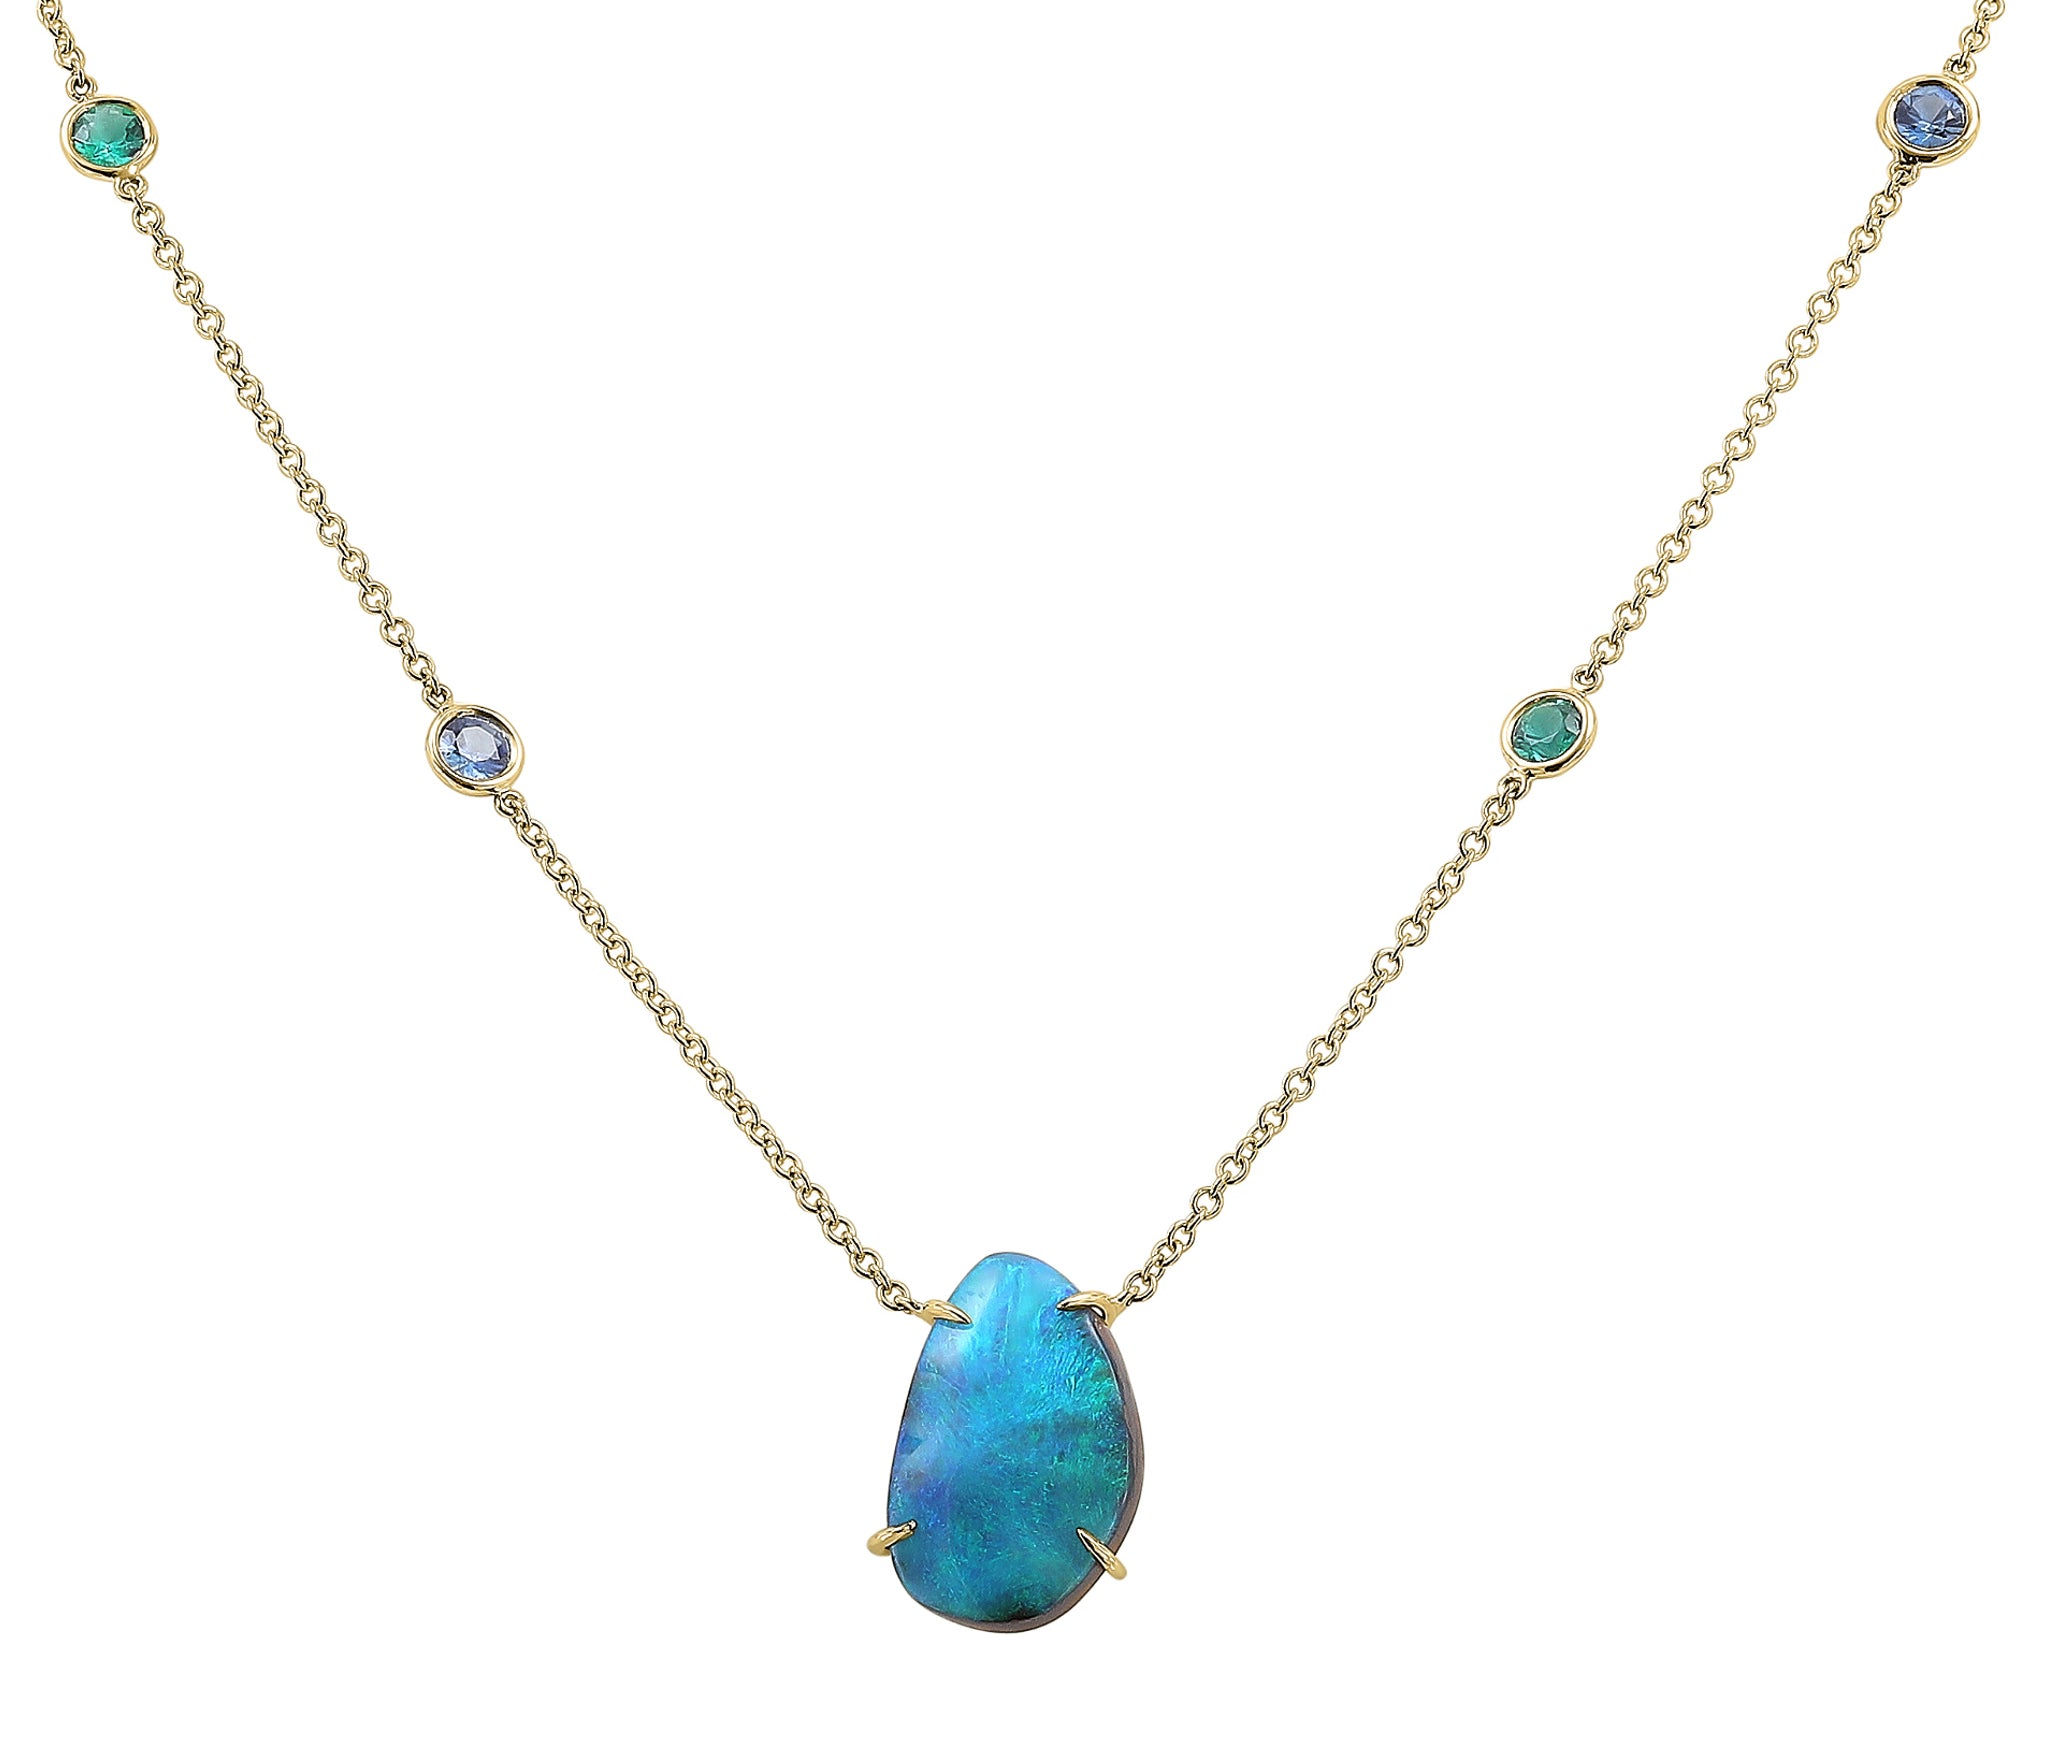 Australian Boulder Opal Necklace with Emeralds and Sapphires